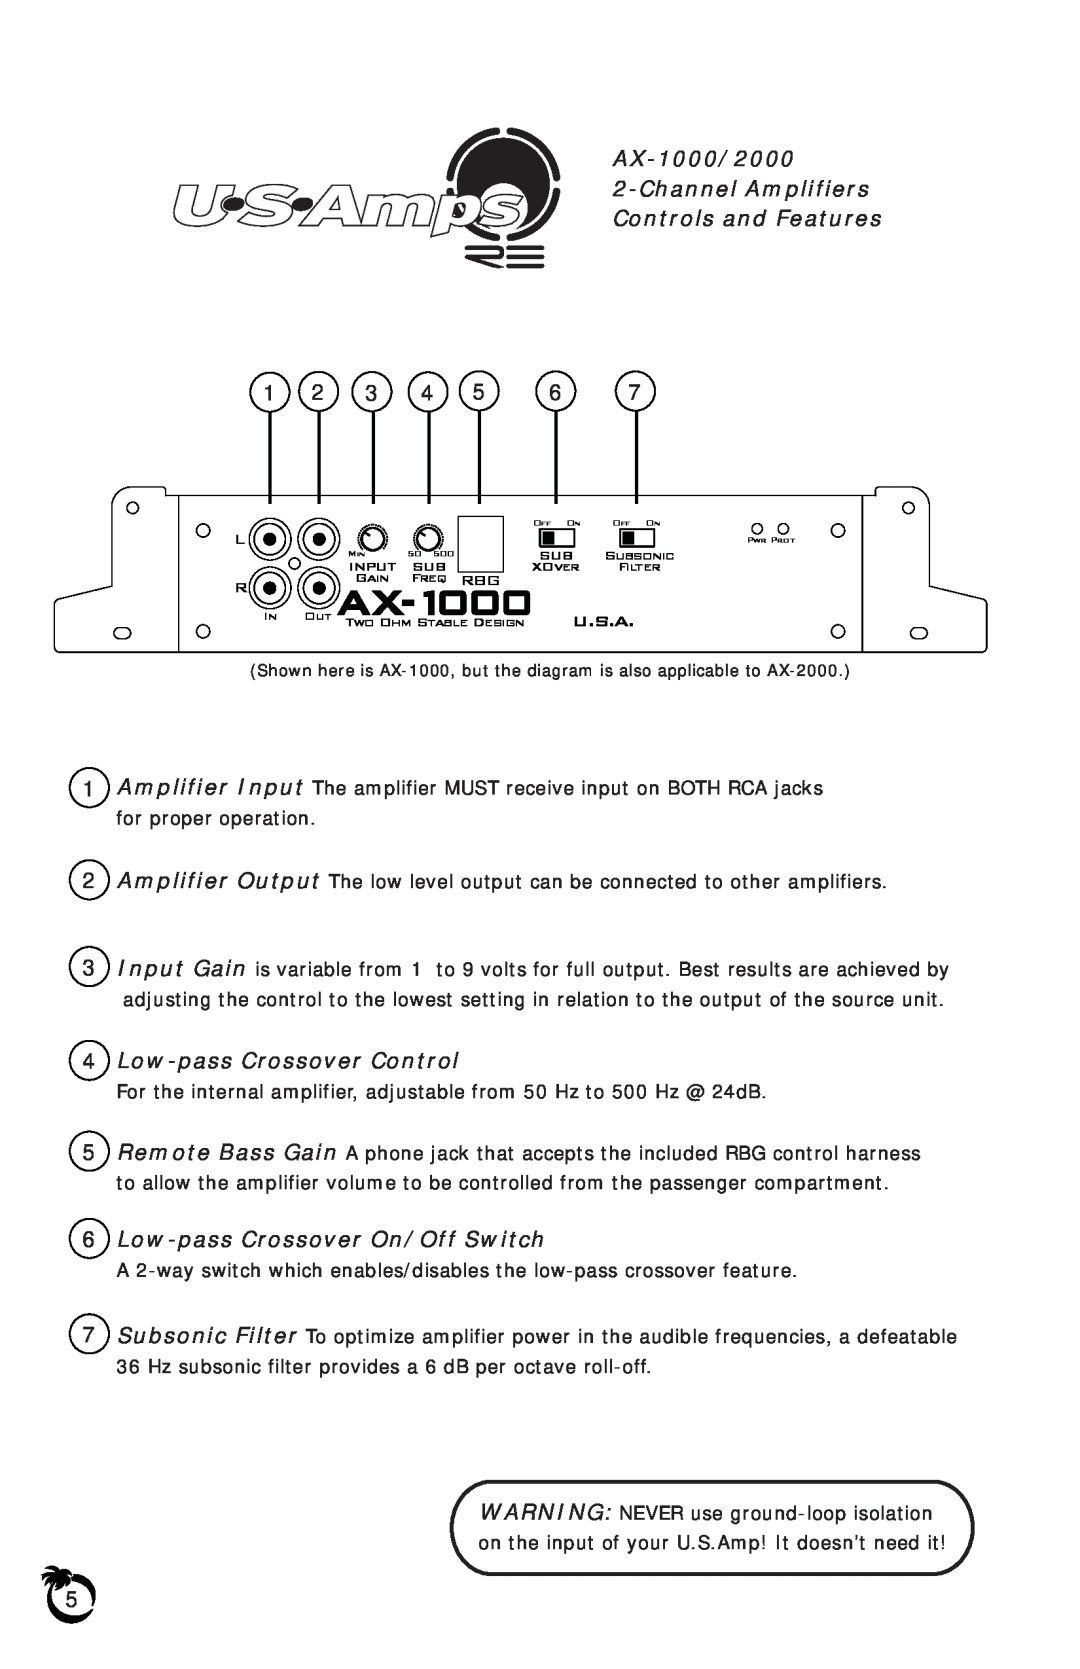 US Amps owner manual AX-1000/2000, U.S.A, Channel Amplifiers, Subsonic, Input, XOver, Filter, Gain, Freq RBG, Out A X -1 